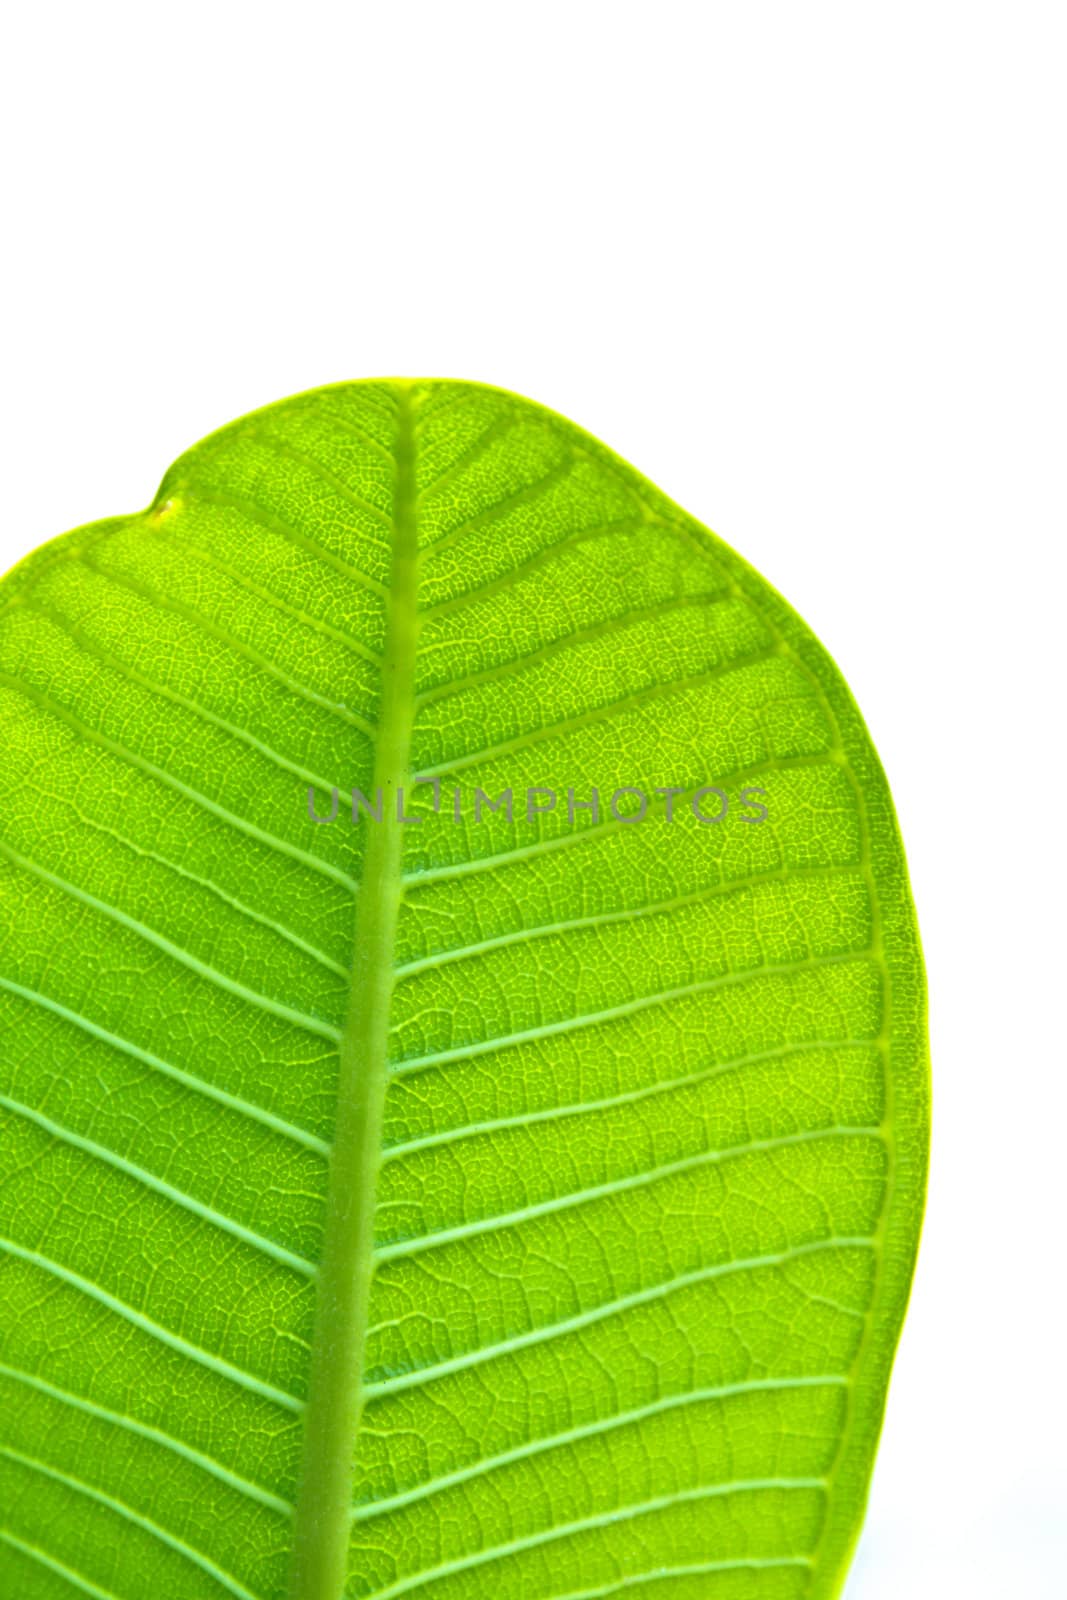 a part of green leaf with clear blue sky